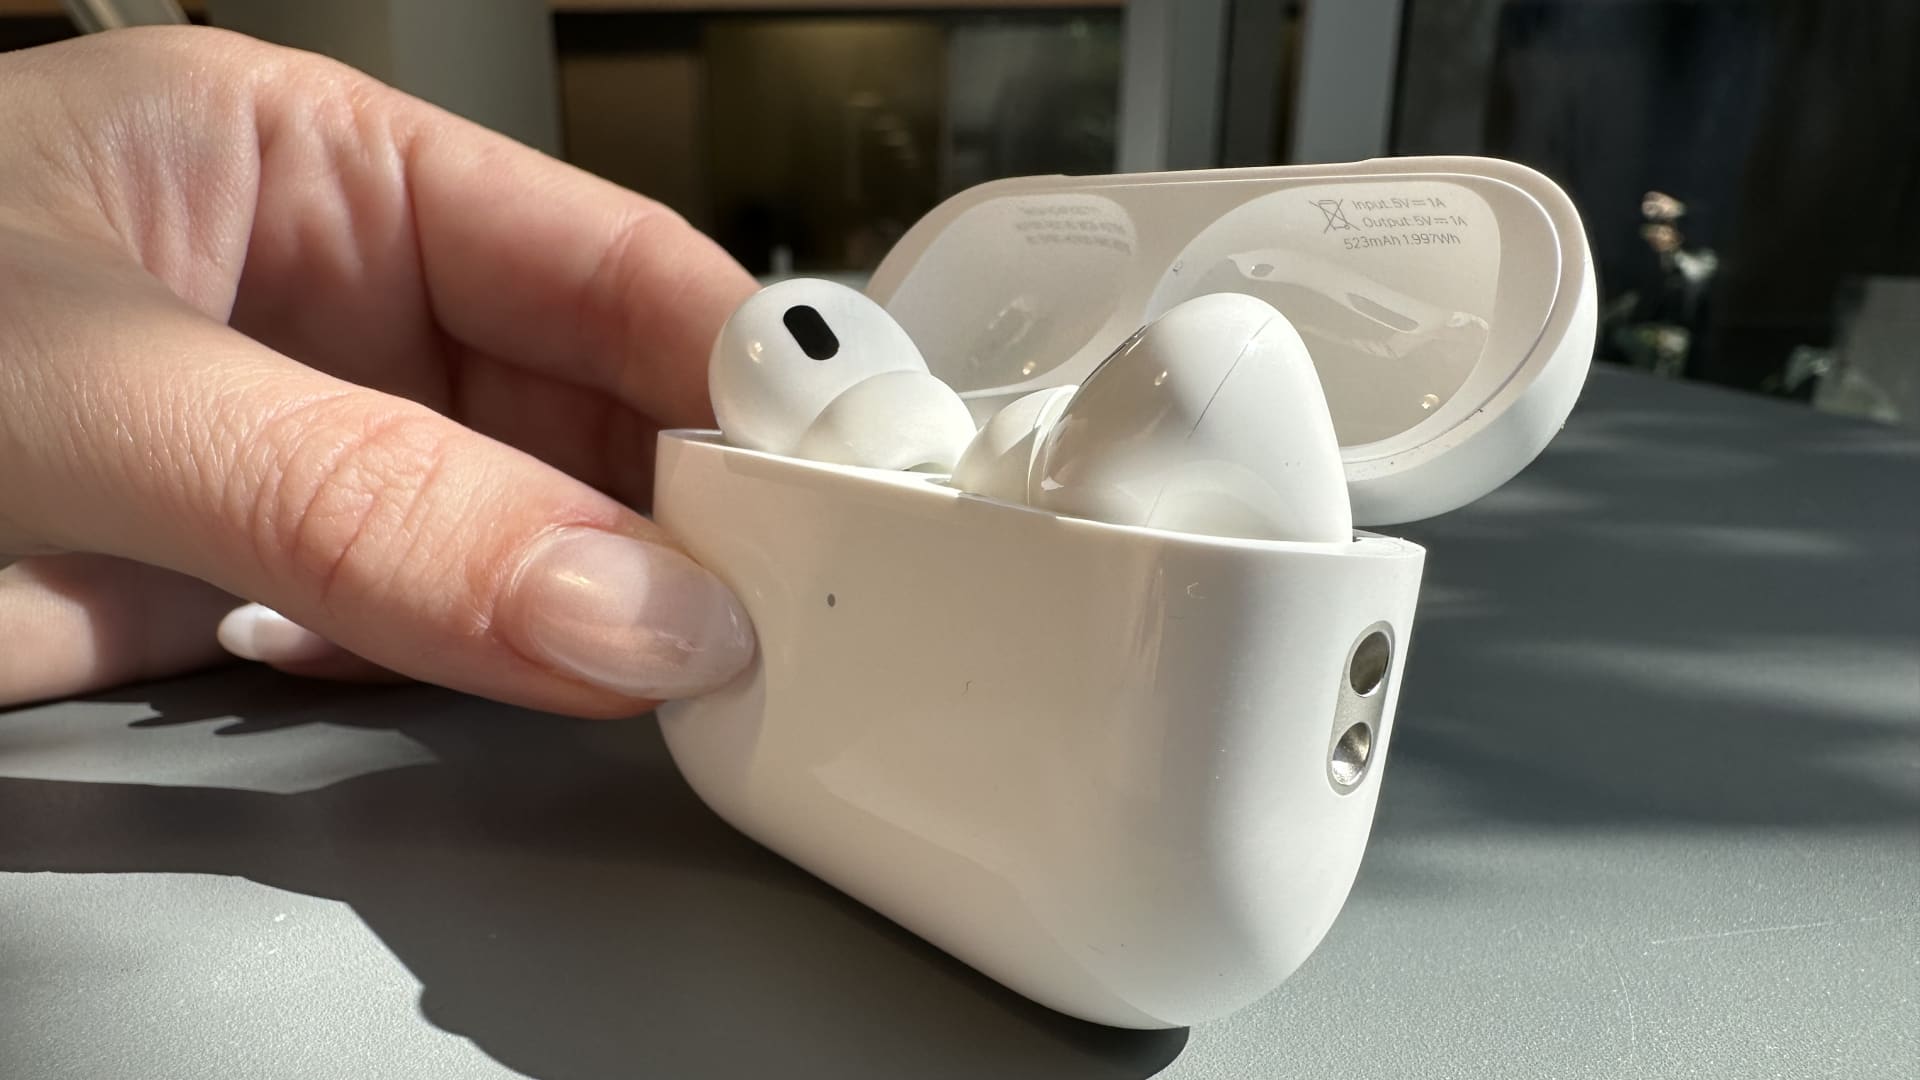 You got the AirPods Pro for the holidays. Here are some of the coolest features you need to know about